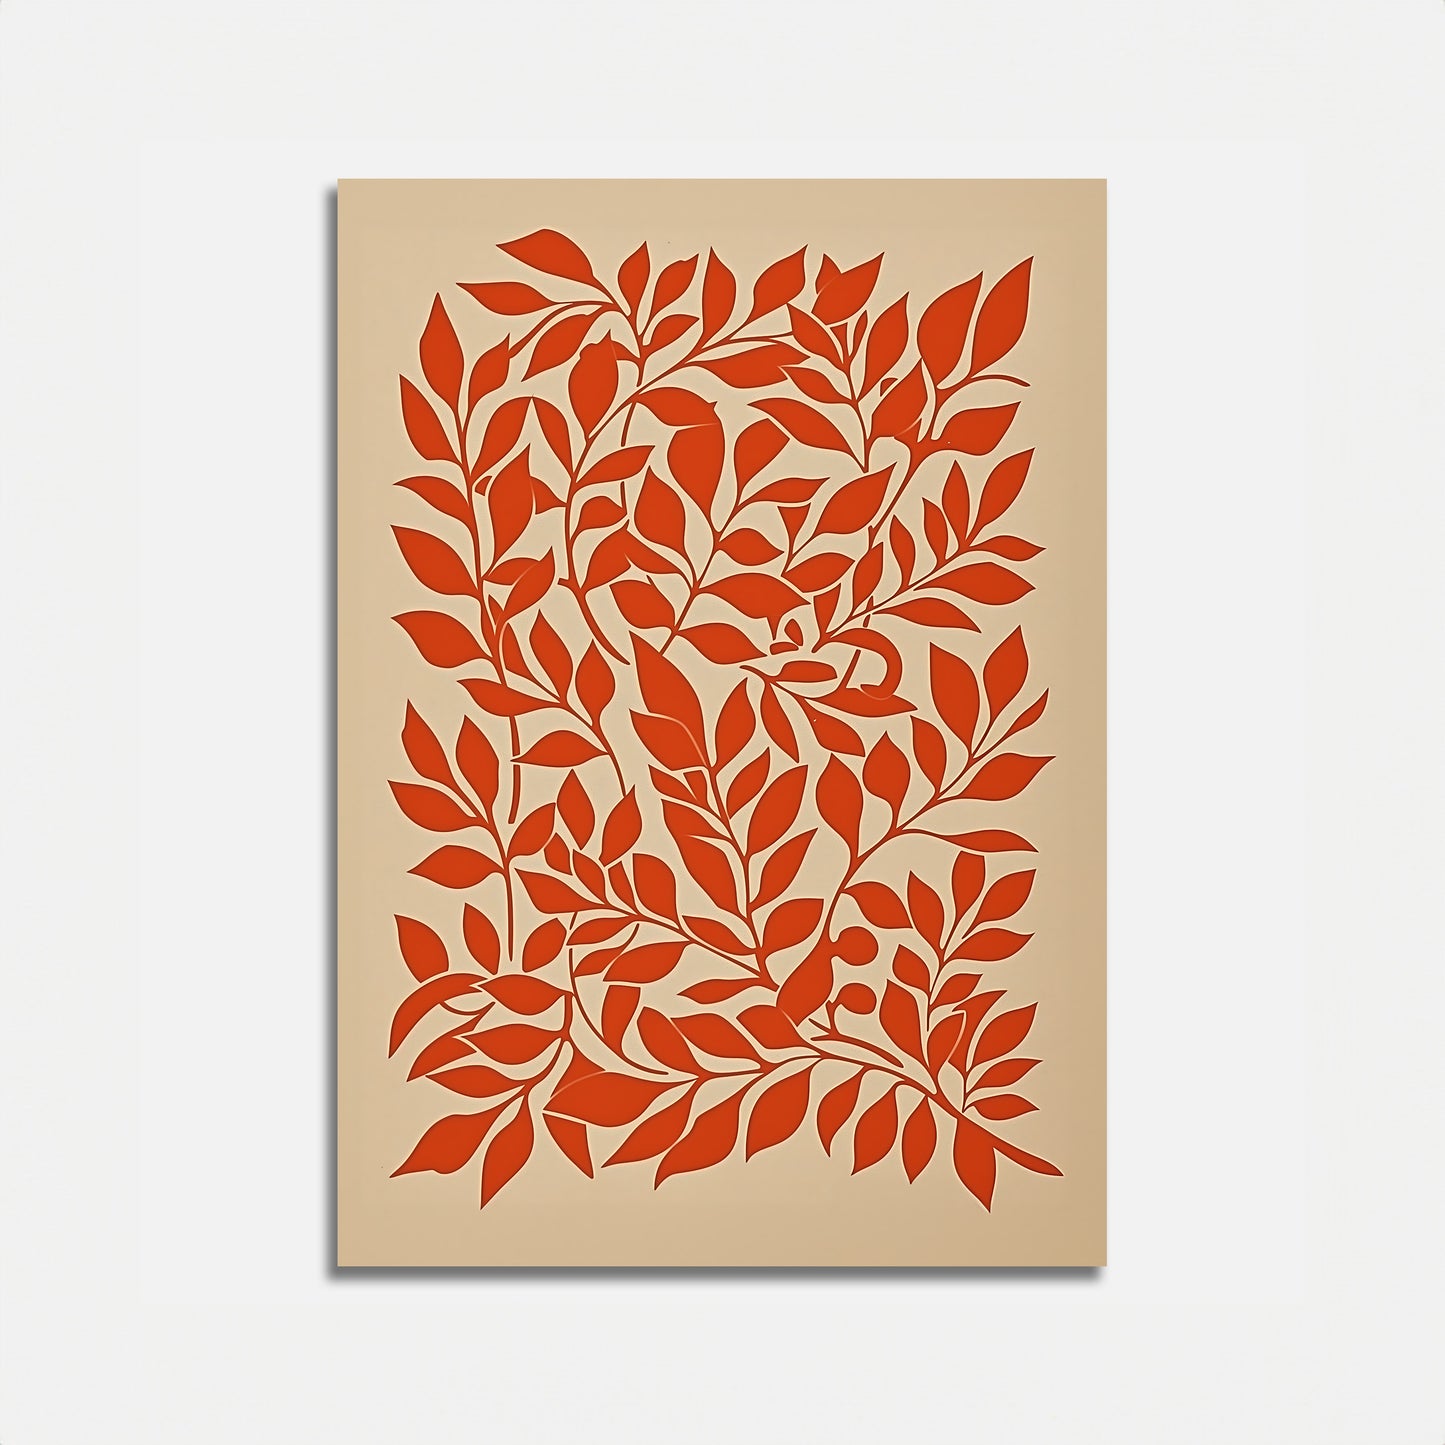 An abstract wall art piece with an intricate red leaf pattern on a beige background.